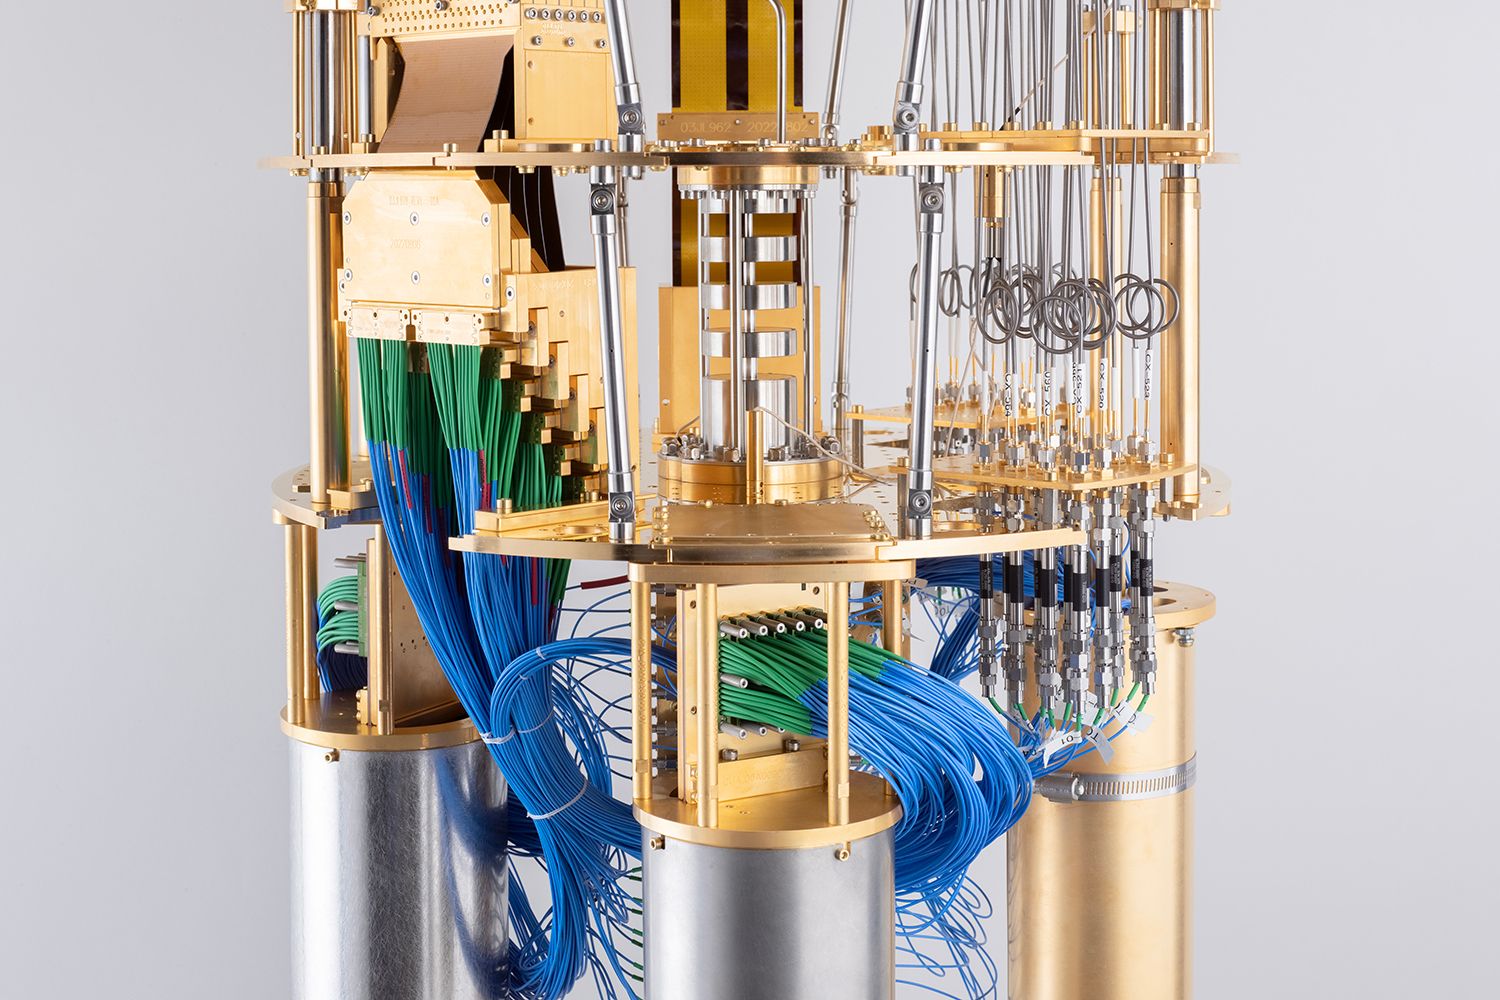 The interior view of the cryostat that cools the IBM Quantum Eagle, a utility-scale quantum processor at 127 qubits.